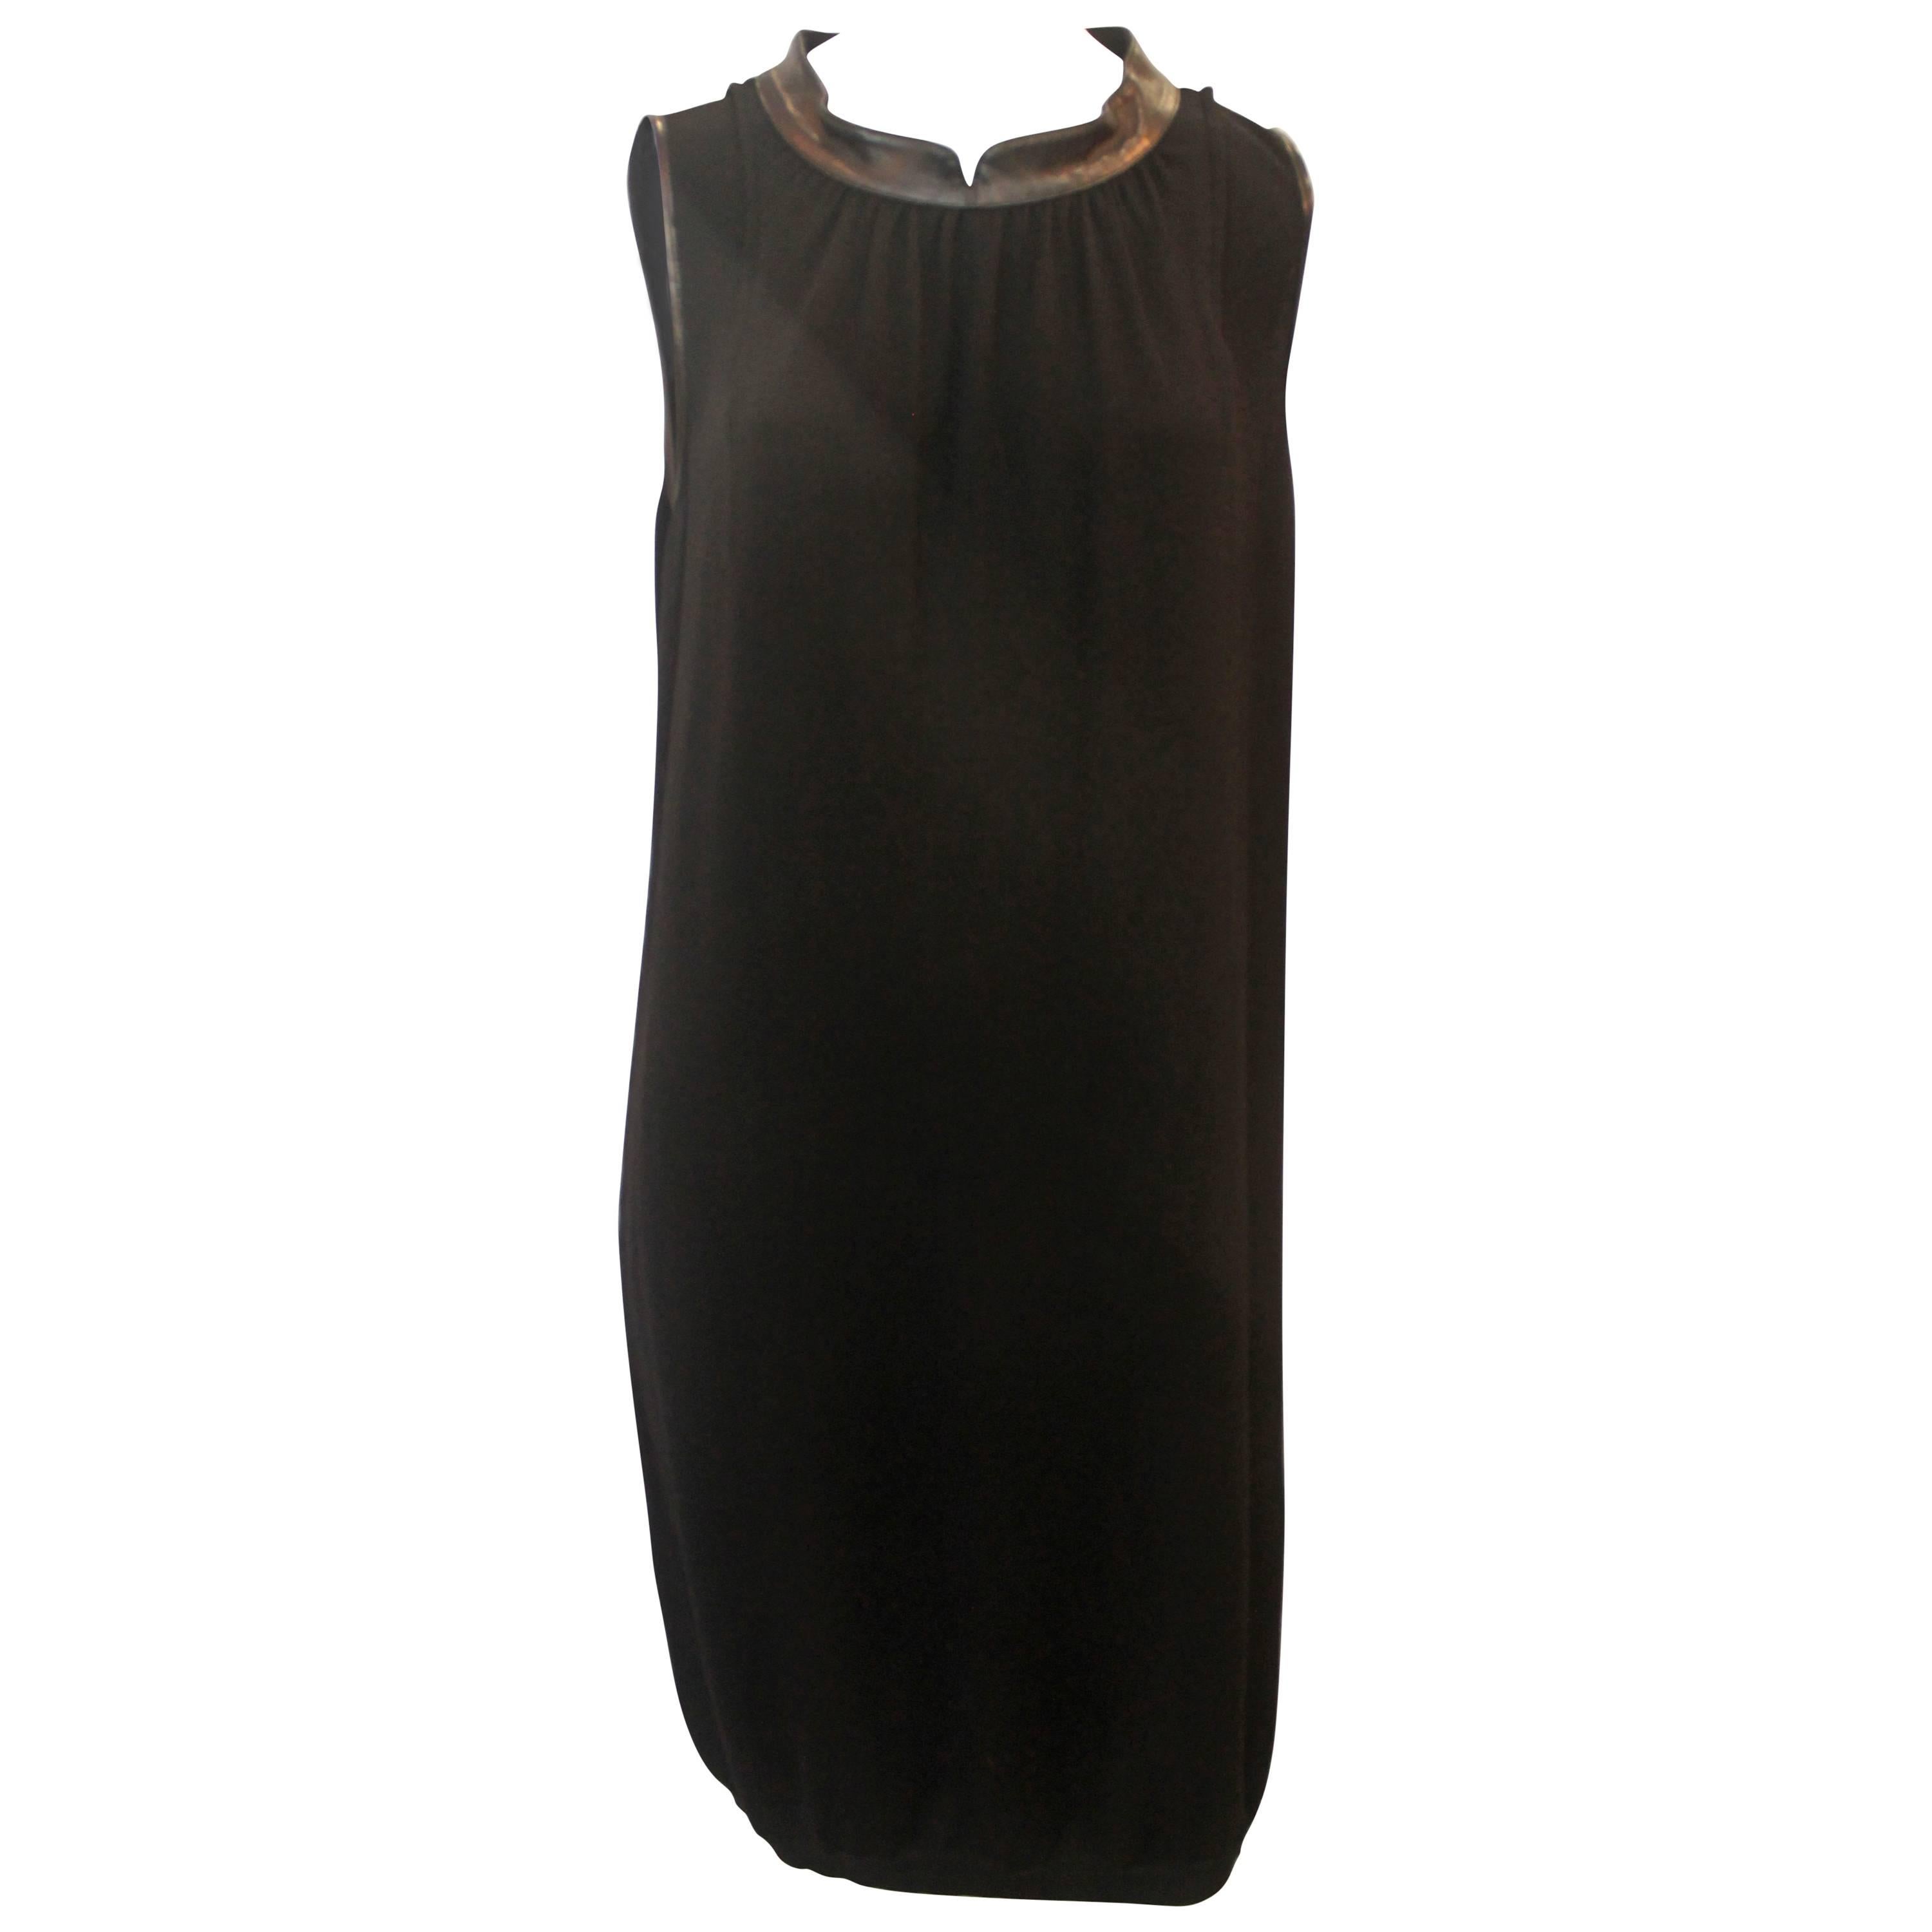 Yves Saint Laurent Black Wool Sleeveless Knit Shift Dress with Leather Collar -M